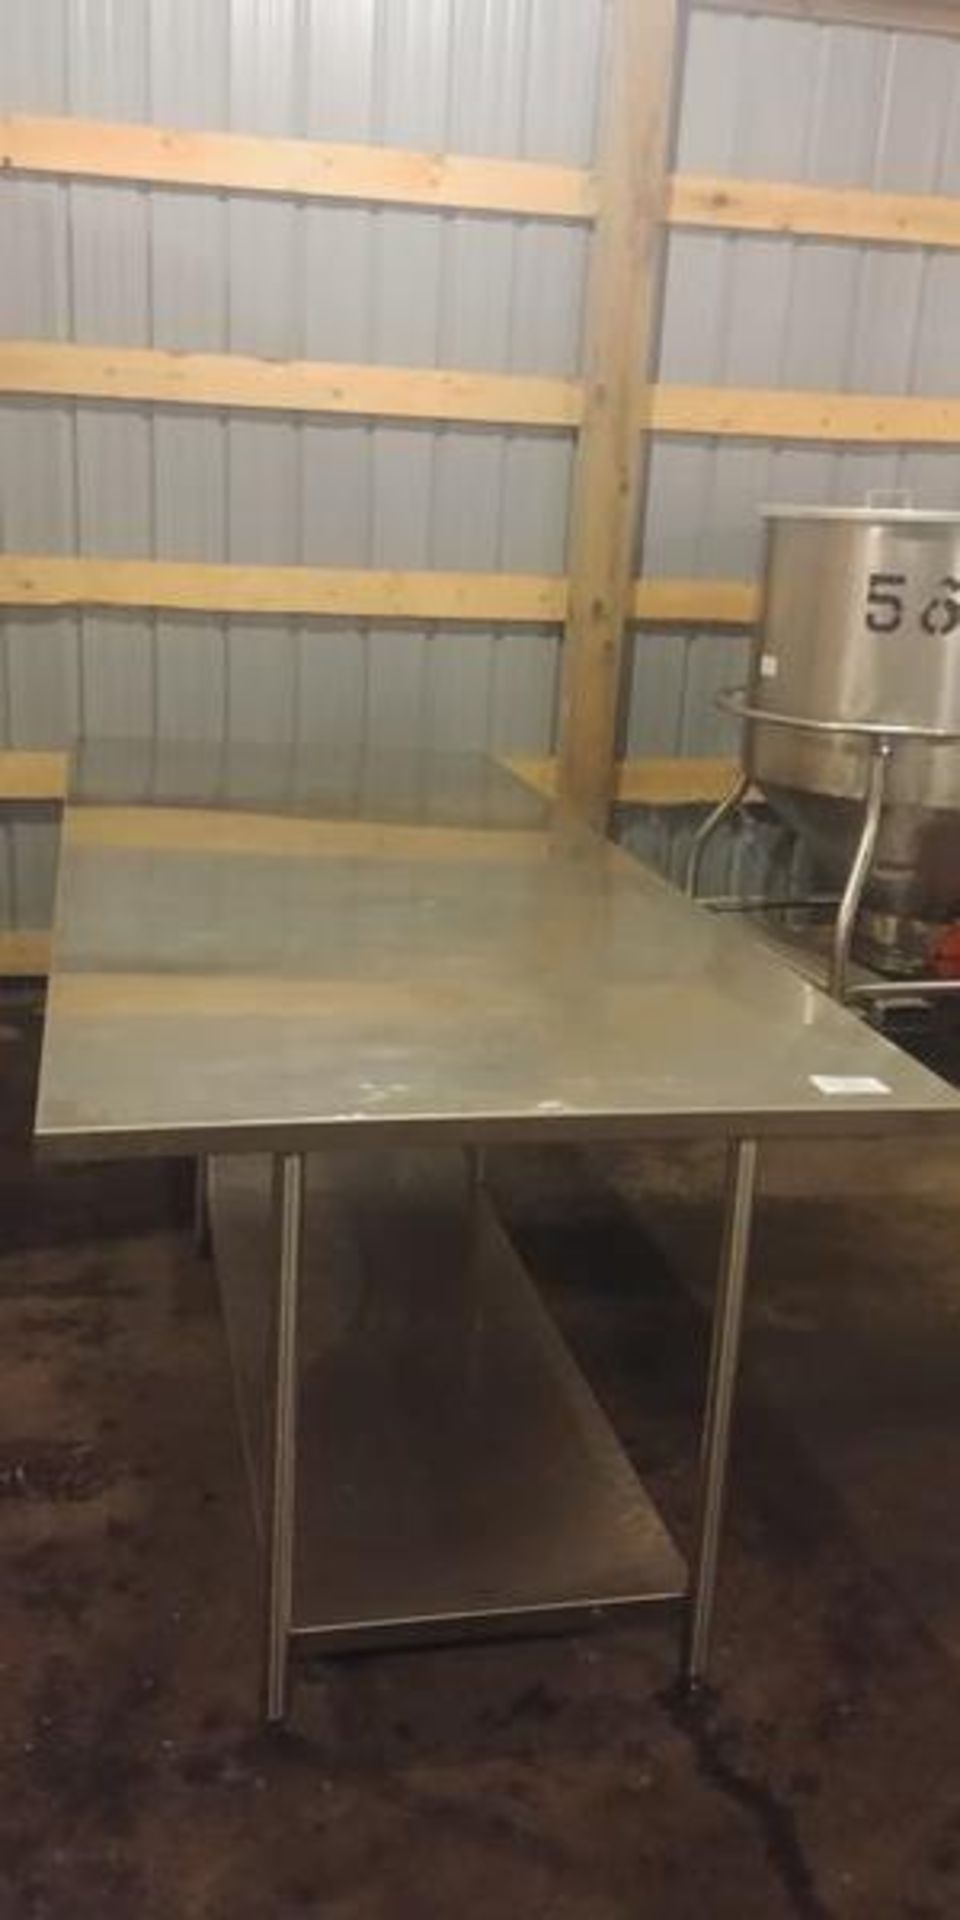 4 x 10 ft Federal Grade Stainless Steel Work Table - Original Build Cost $3100.00